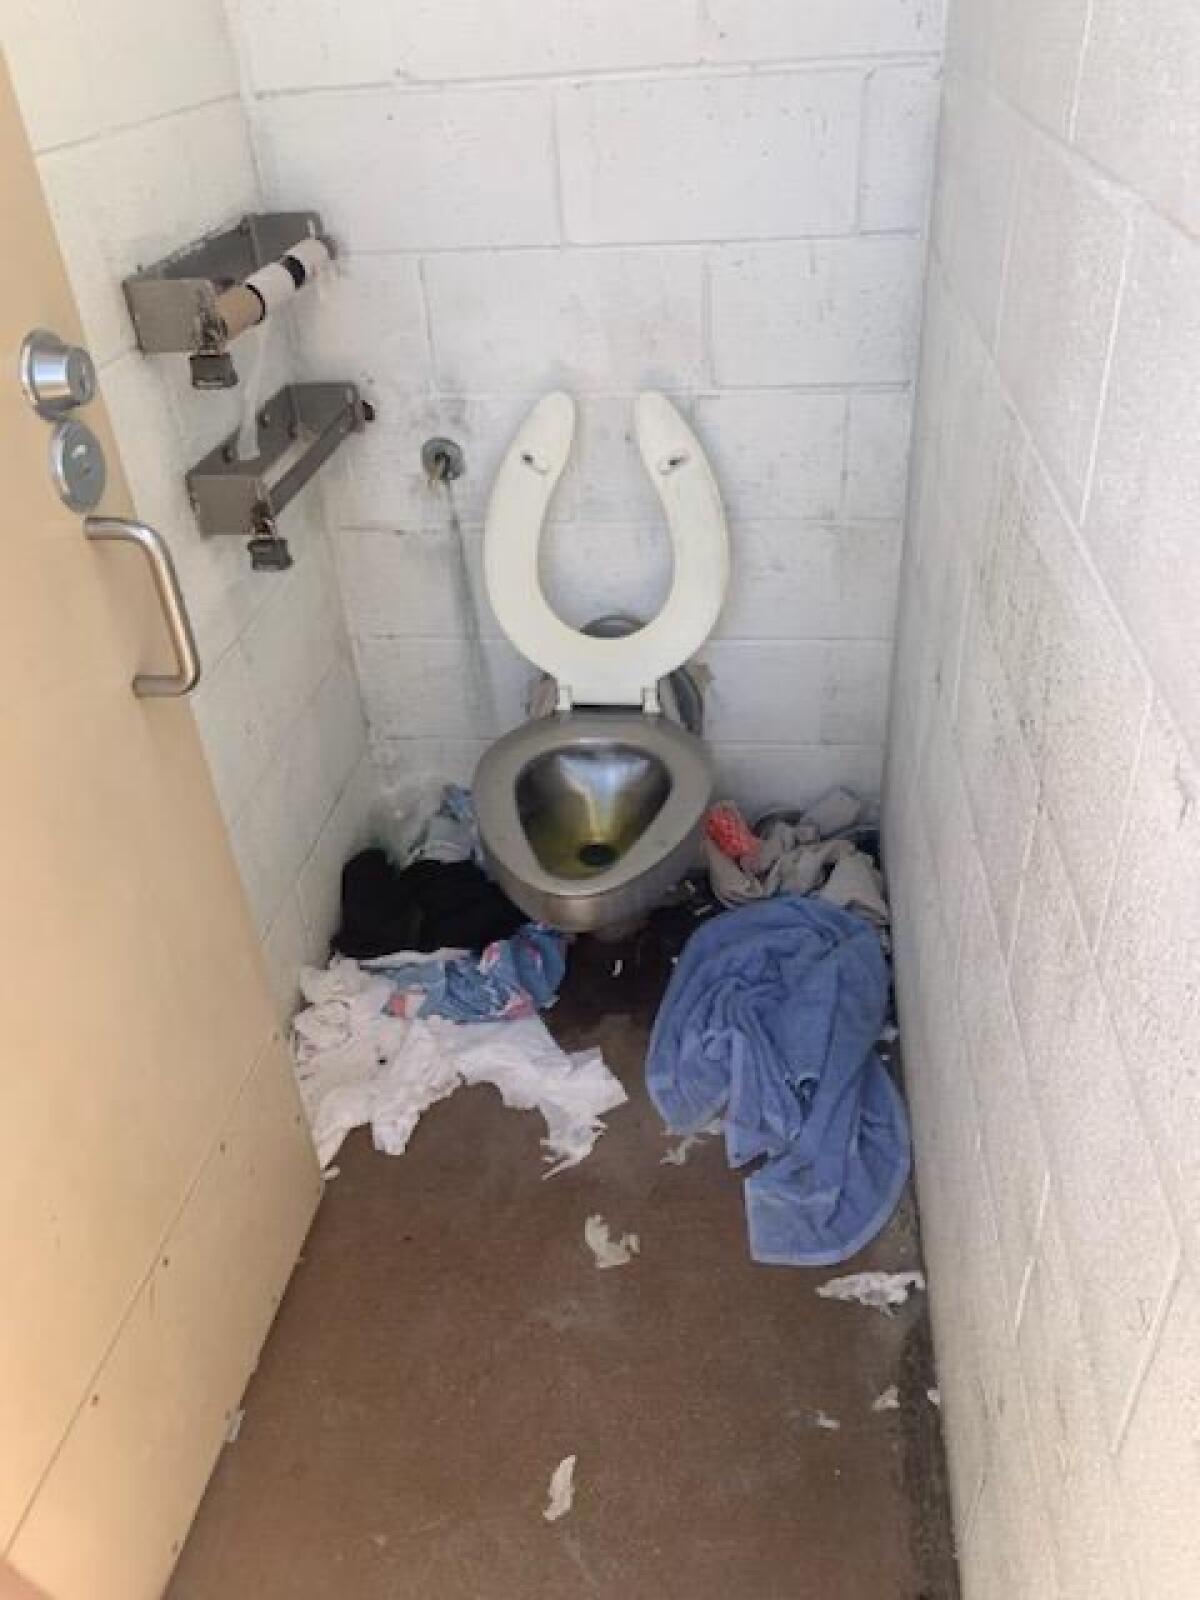 This photo of a messy stall was taken in April at the south restroom facility at La Jolla Shores' Kellogg Park.